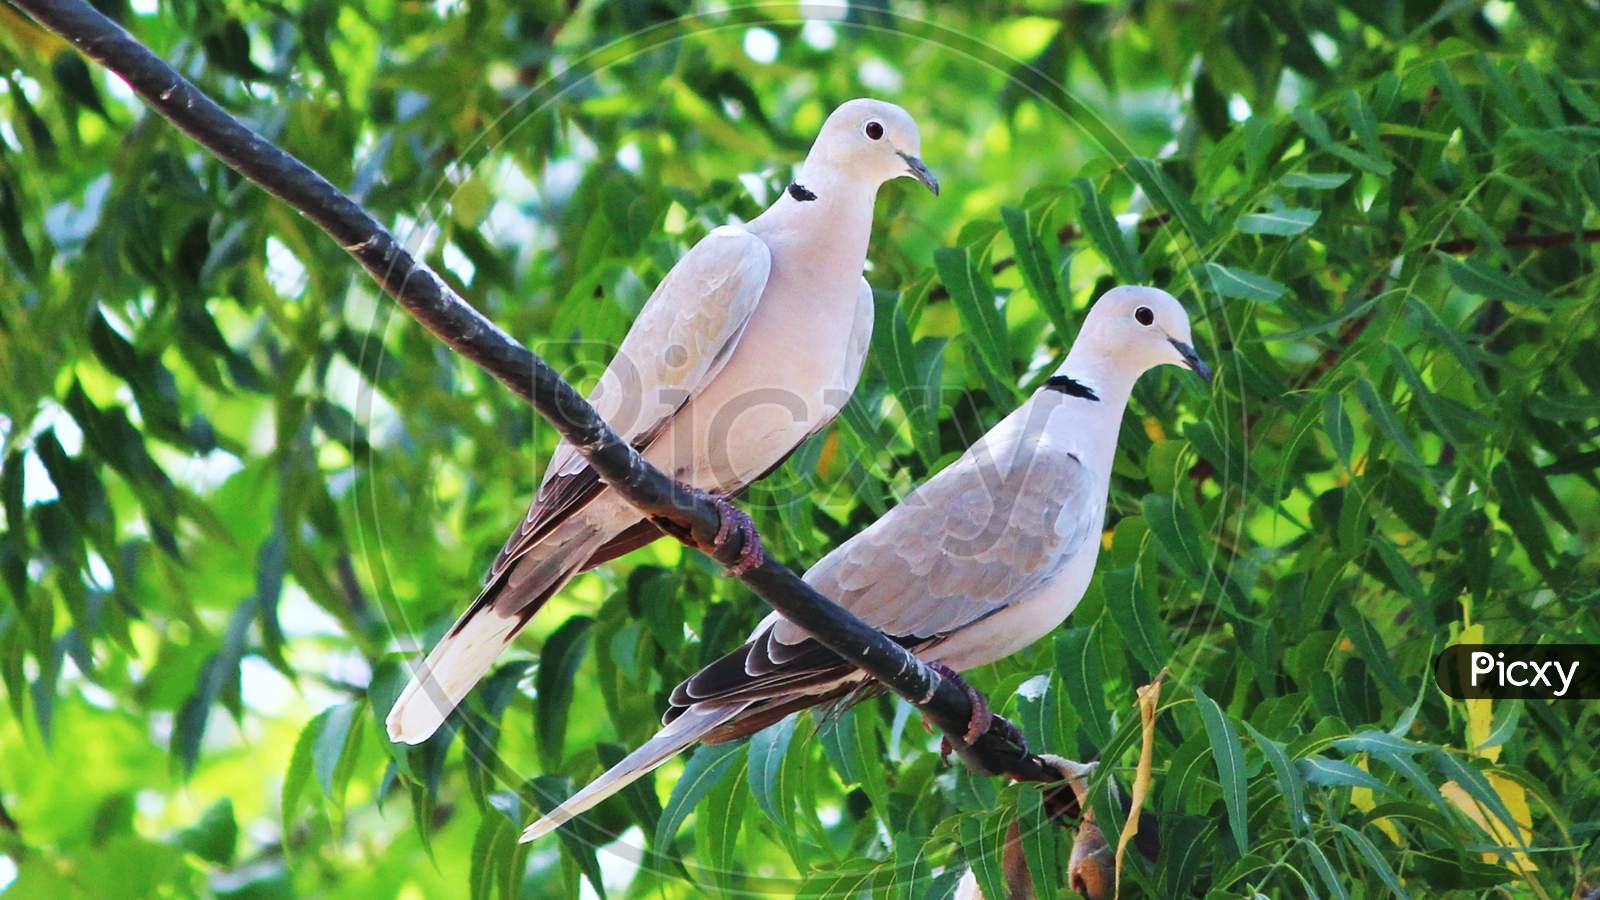 A beautiful Indian collared dove couple